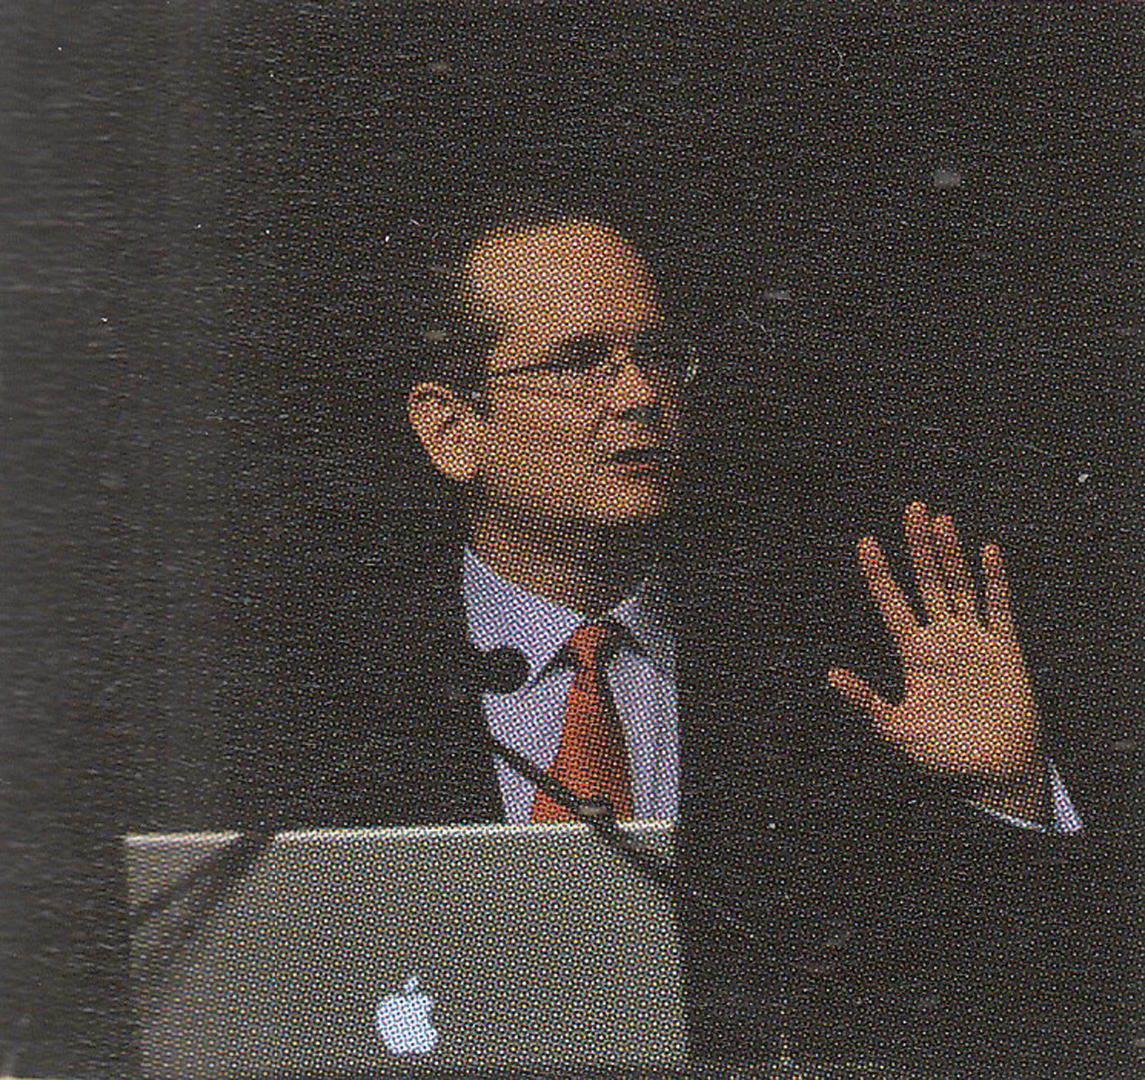 ©ISEA2008: 14th International Symposium on Electronic Art, Lawrence Lessig, The Proper (and Essential) Place for Copyright